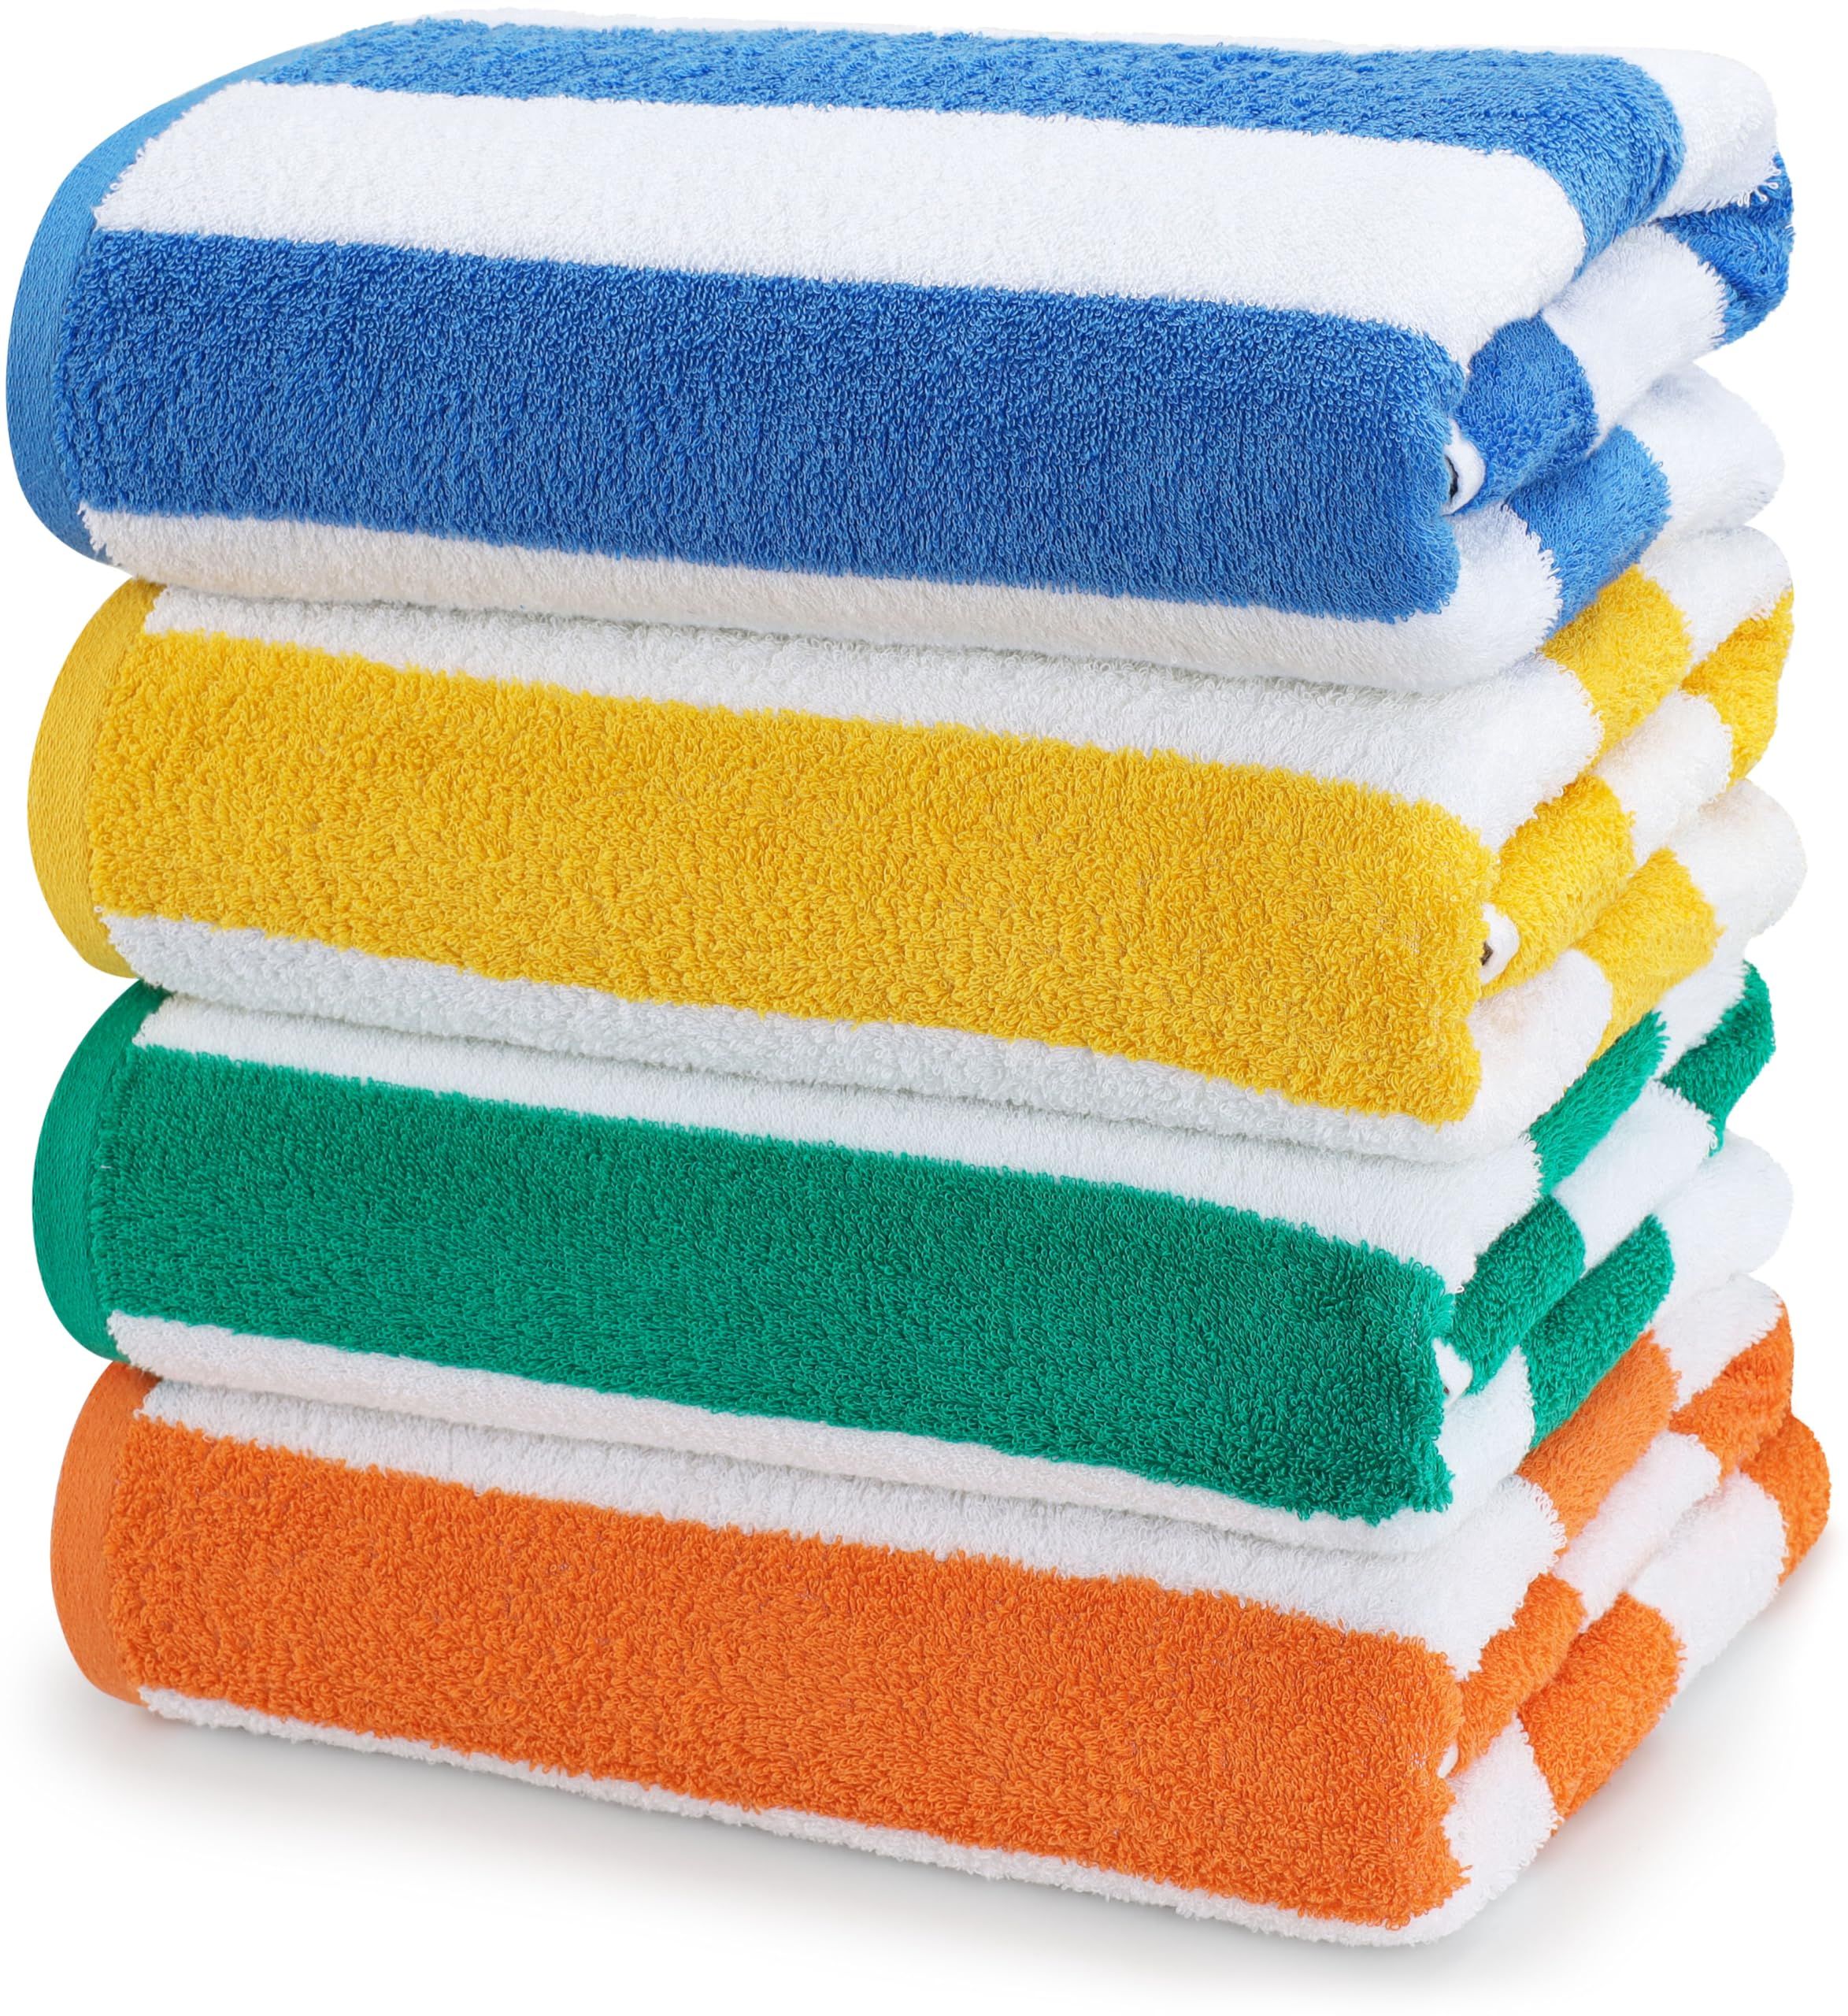 Utopia Towels Cabana Stripe Beach Towels (76 x 152 cm) - 100% Ring Spun Cotton Large Pool Towels, Soft and Quick Dry Swim Towels (Pack of 4) (Blue, Green, Orange & Yellow) | Amazon (US)